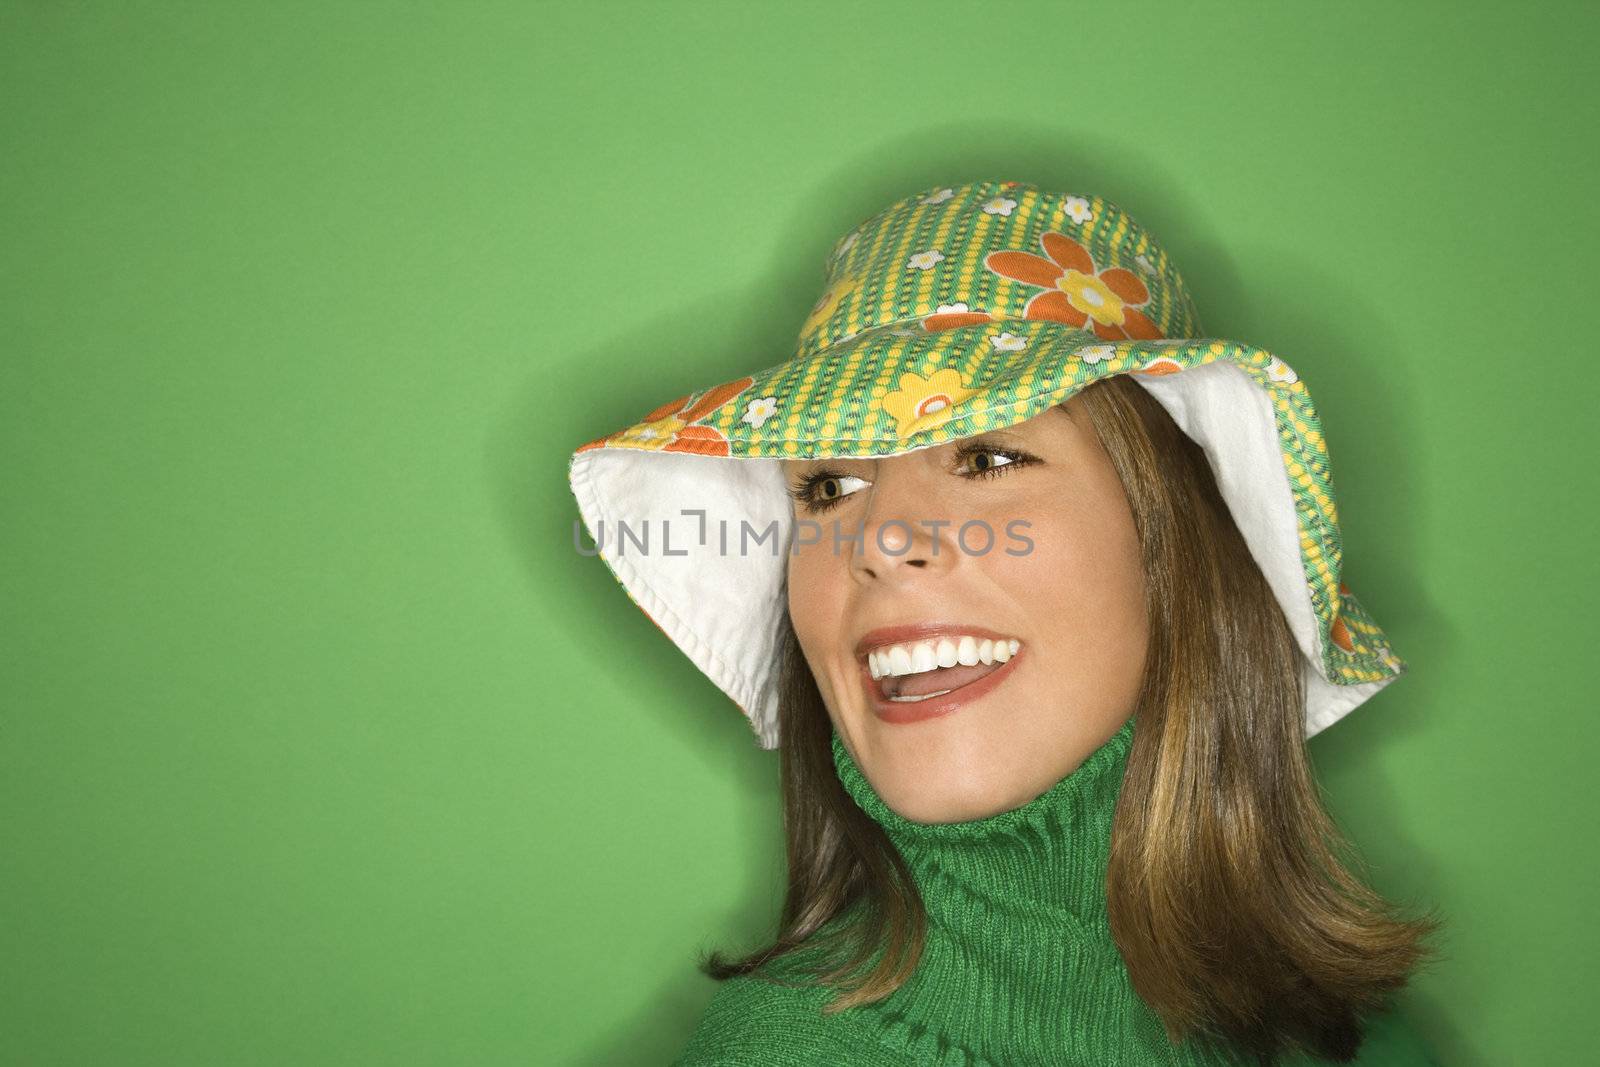 Portrait of smiling young adult Caucasian woman on green background wearing floppy hat.